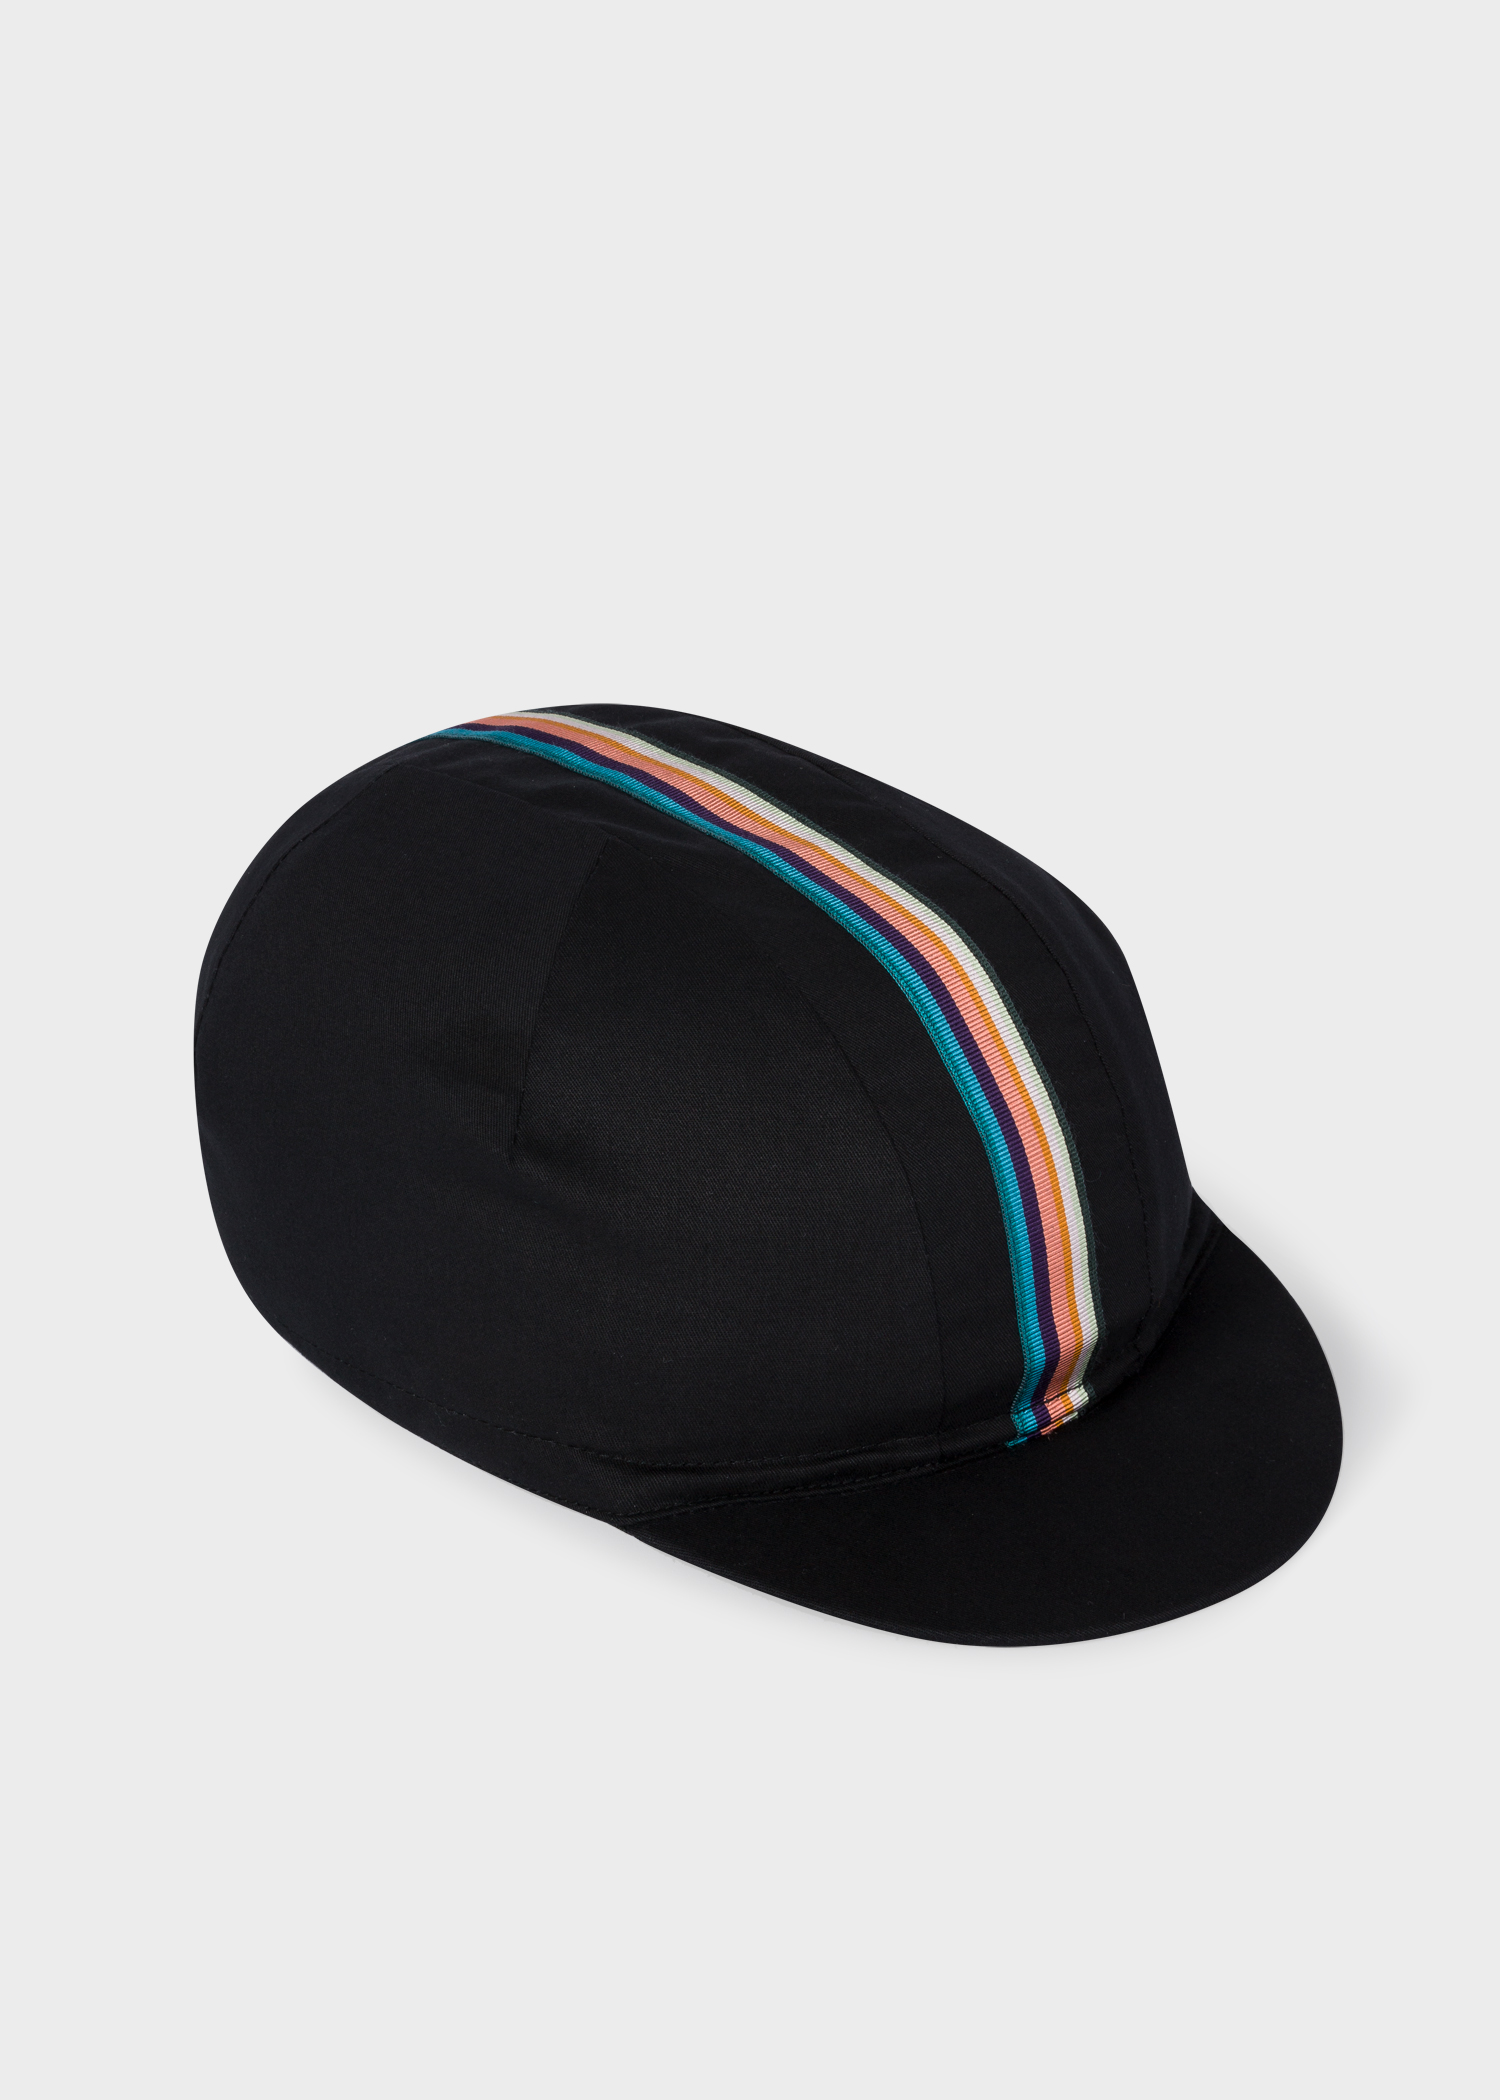 Angled view - Men's Black Cycling Cap With 'Artist Stripe' Webbing  Paul Smith